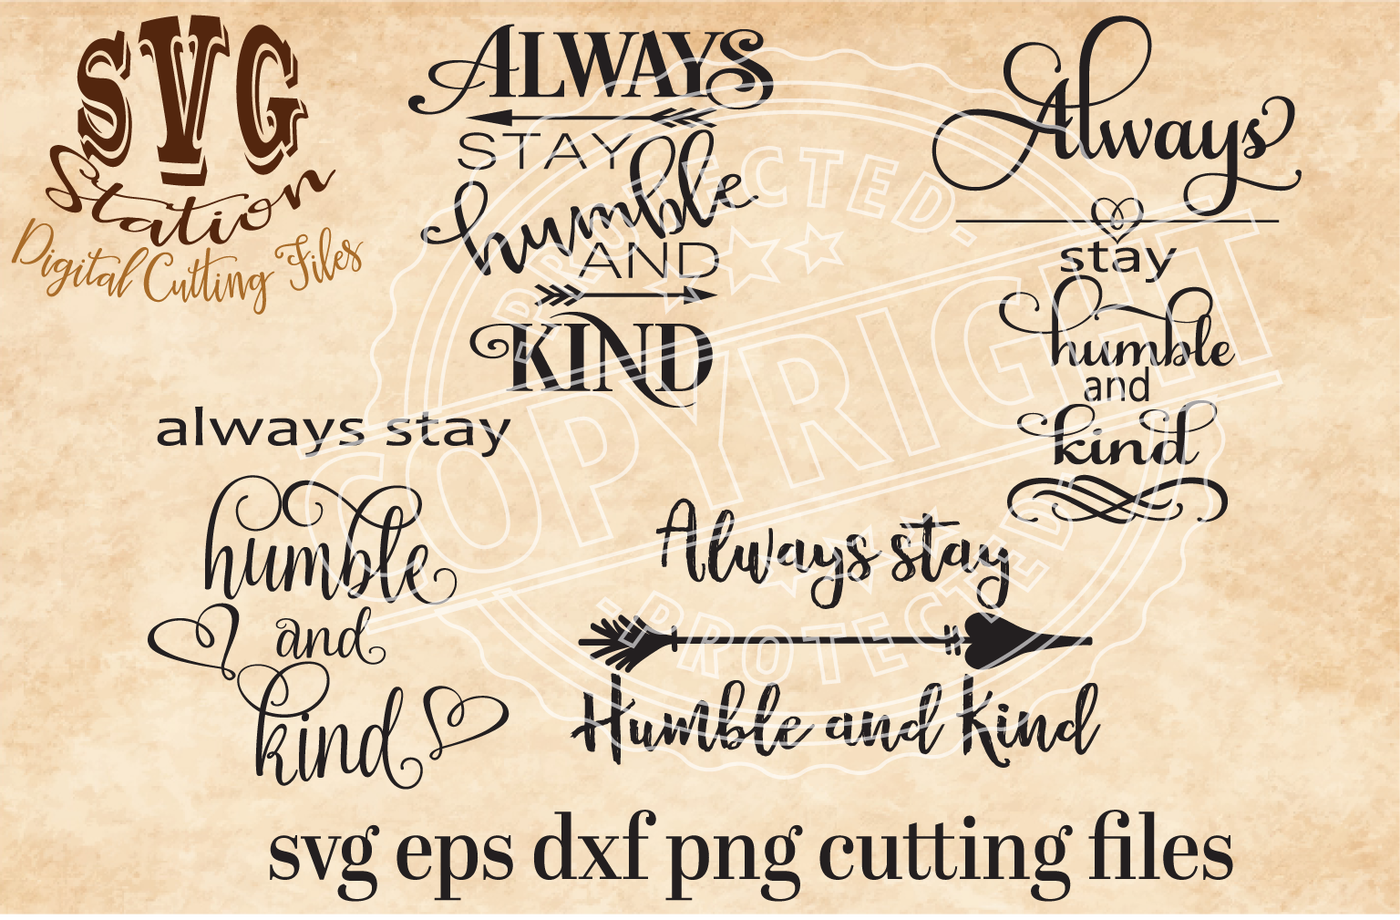 ori 49036 9758b01980210c41d4b5768c42baea639f74a491 always stay humble and kind svg dxf png eps cutting file for silhouette cricut